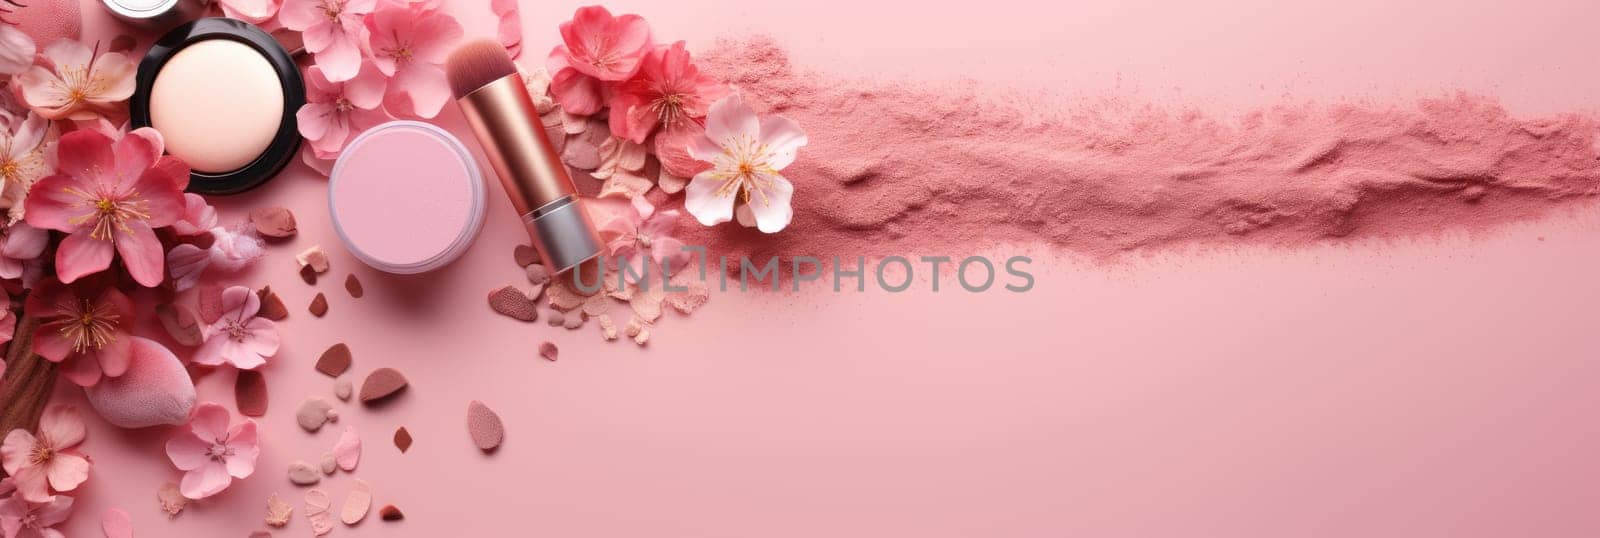 Stylish pink background for cosmetics mockup by natali_brill